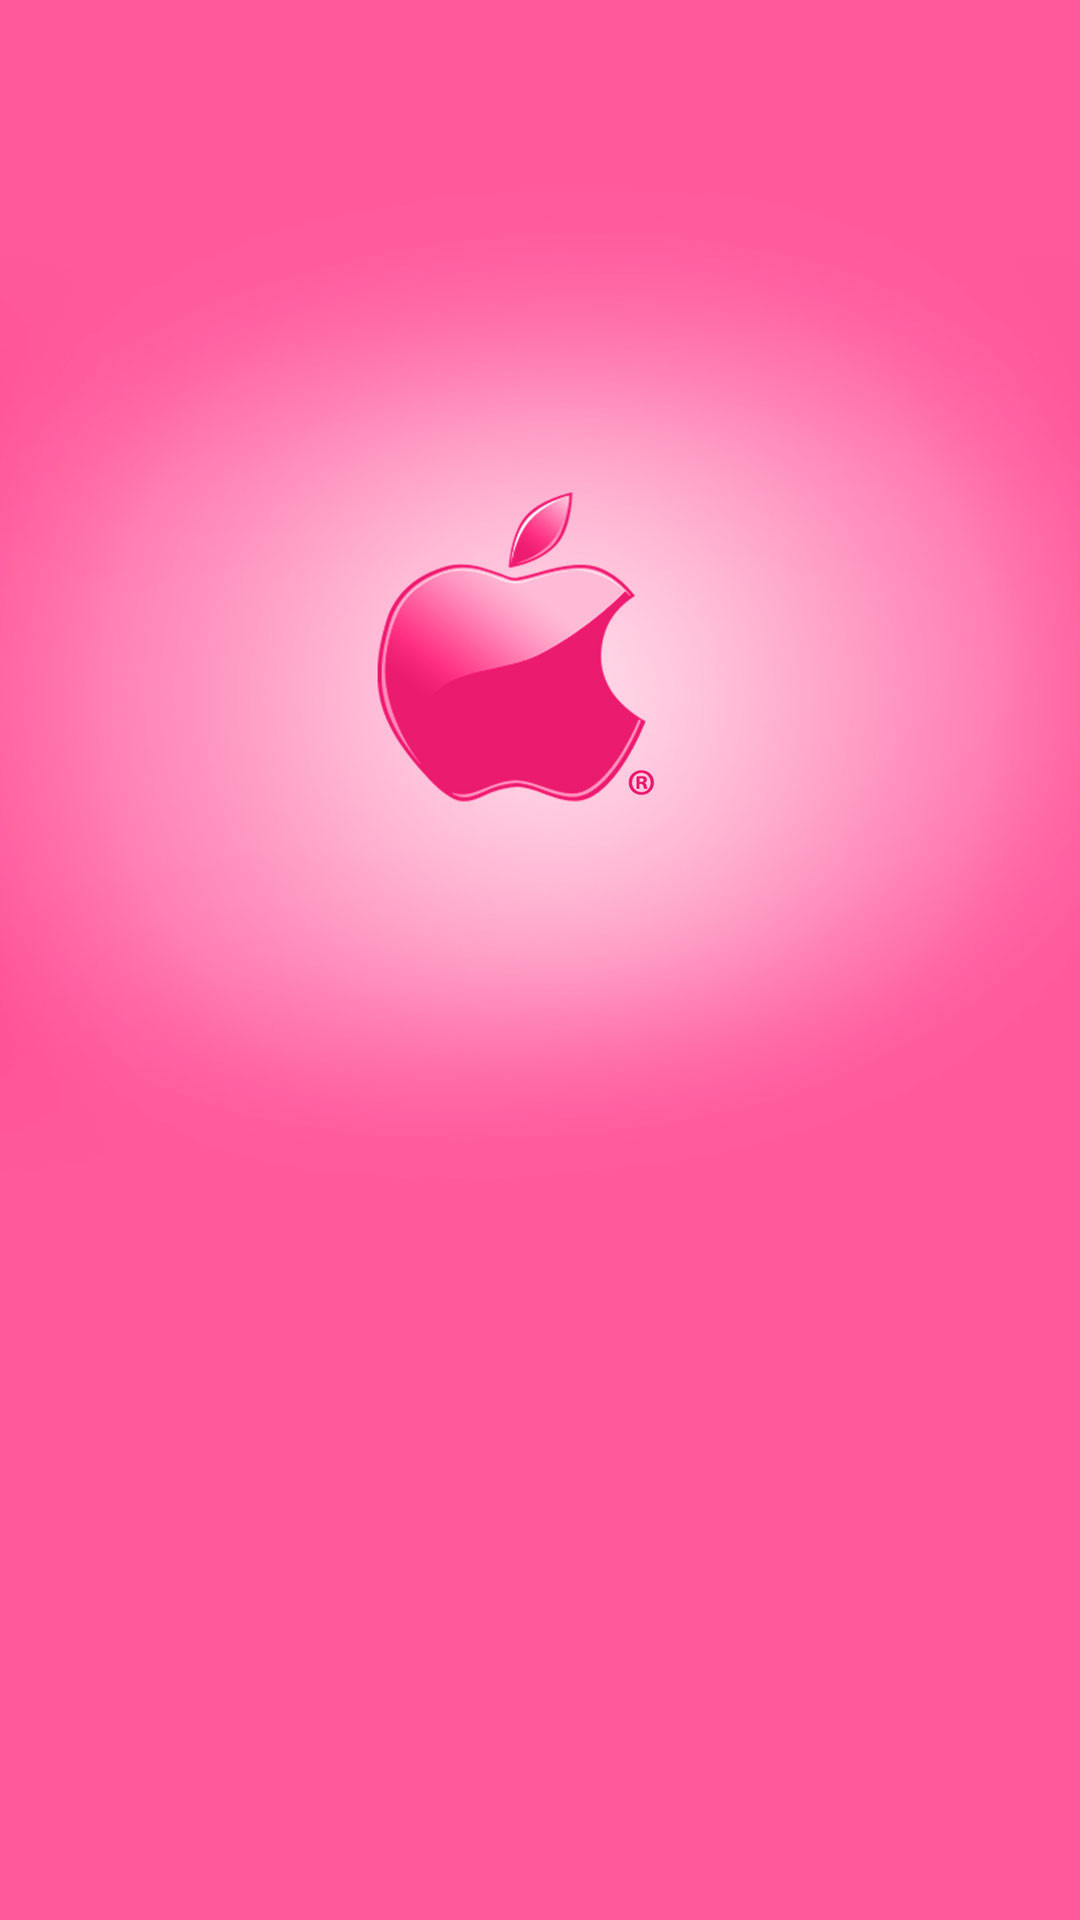 1080x1920 Pink iPhone 6 Plus wallpaper for girls